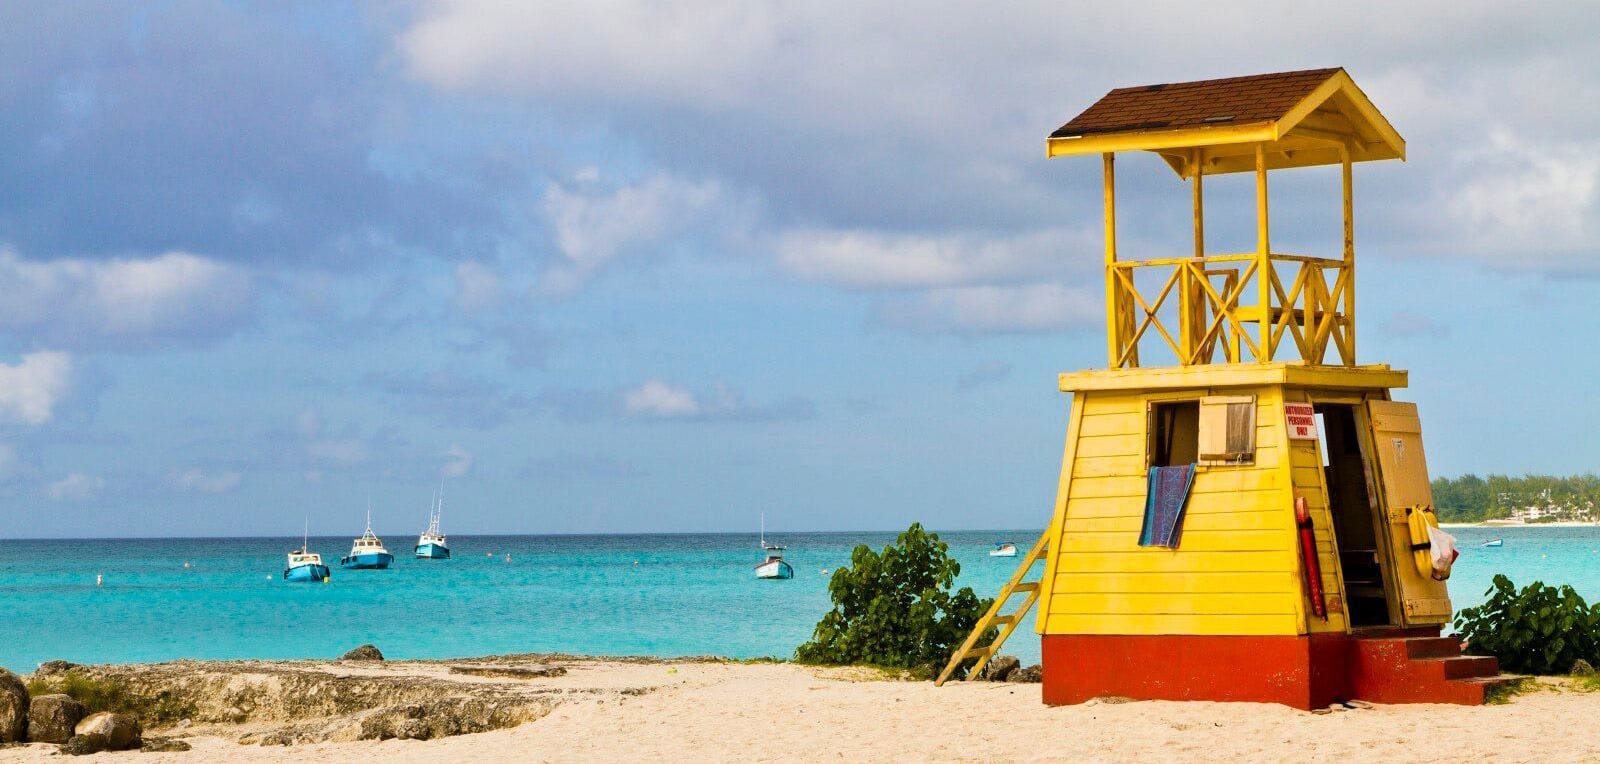 Yellow and red lifeguard station on a white sand beach